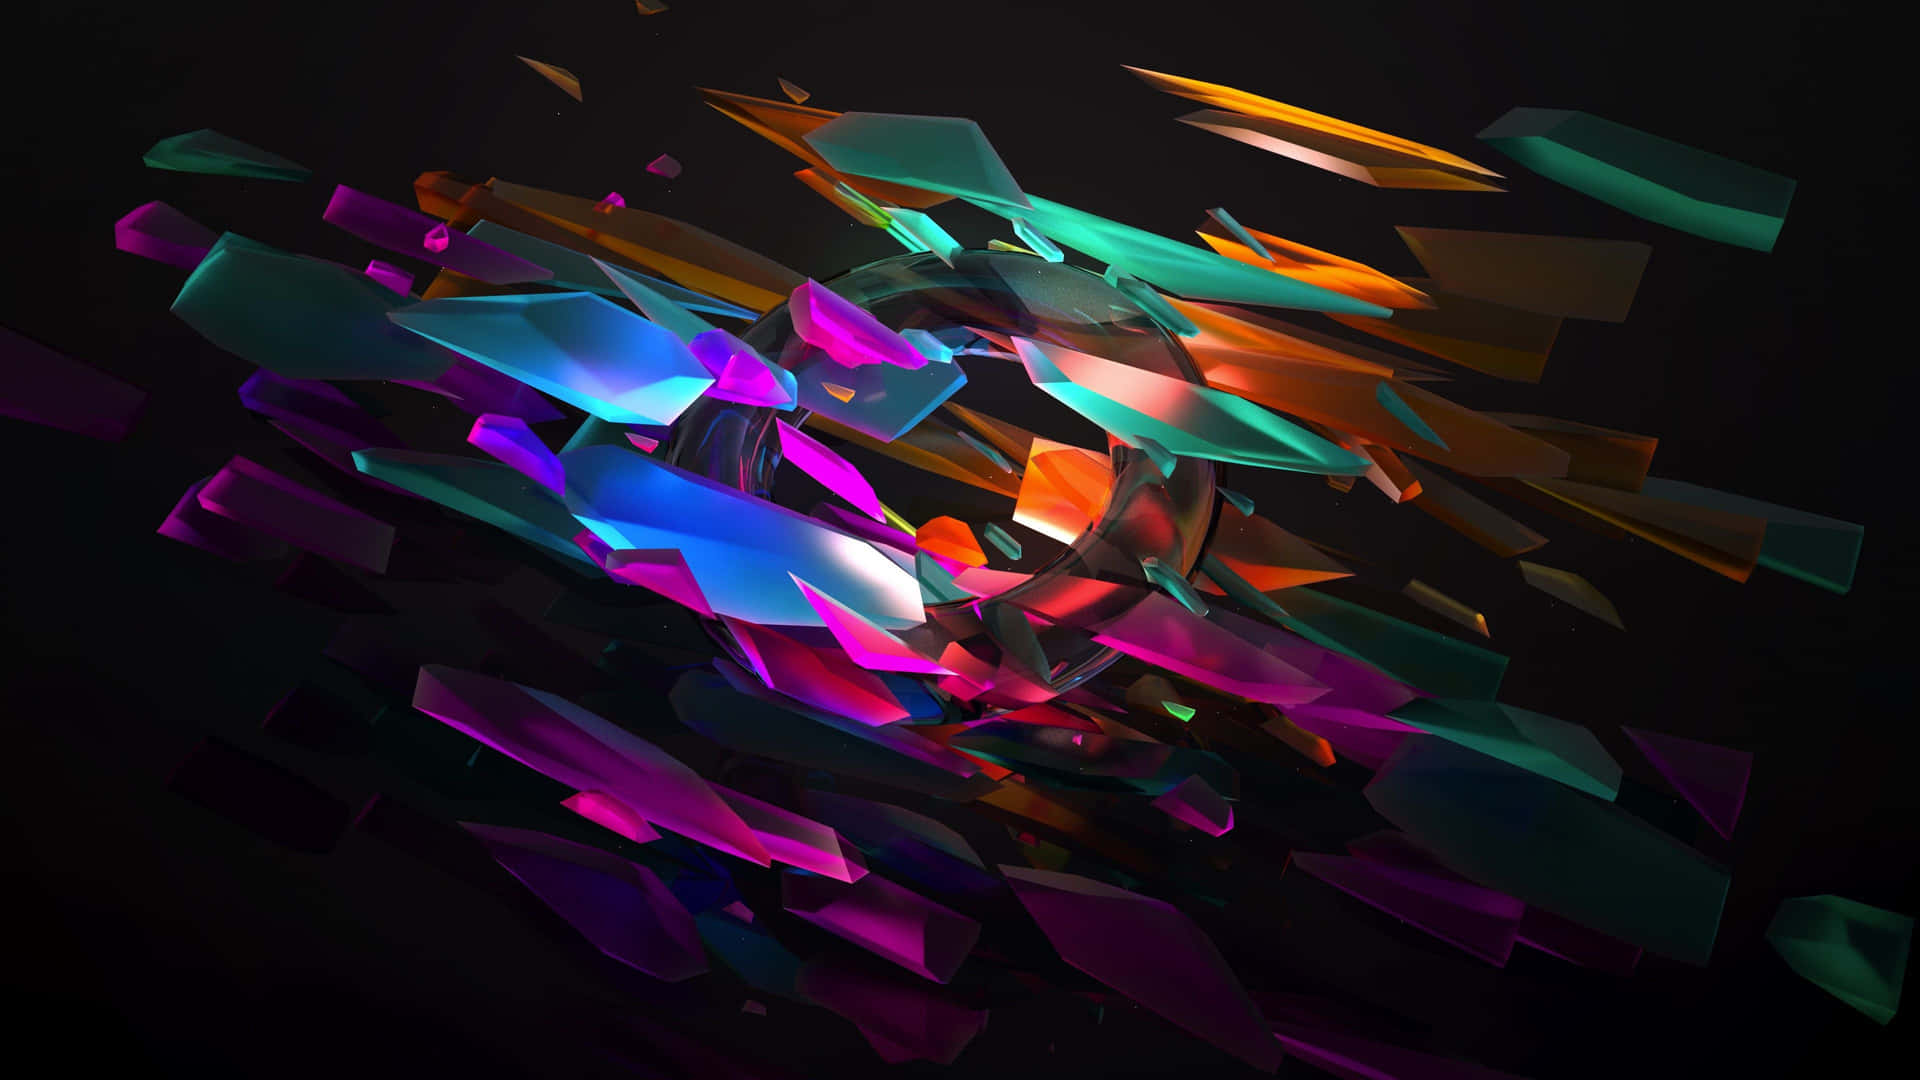 Enter the world of Abstract Gaming Wallpaper